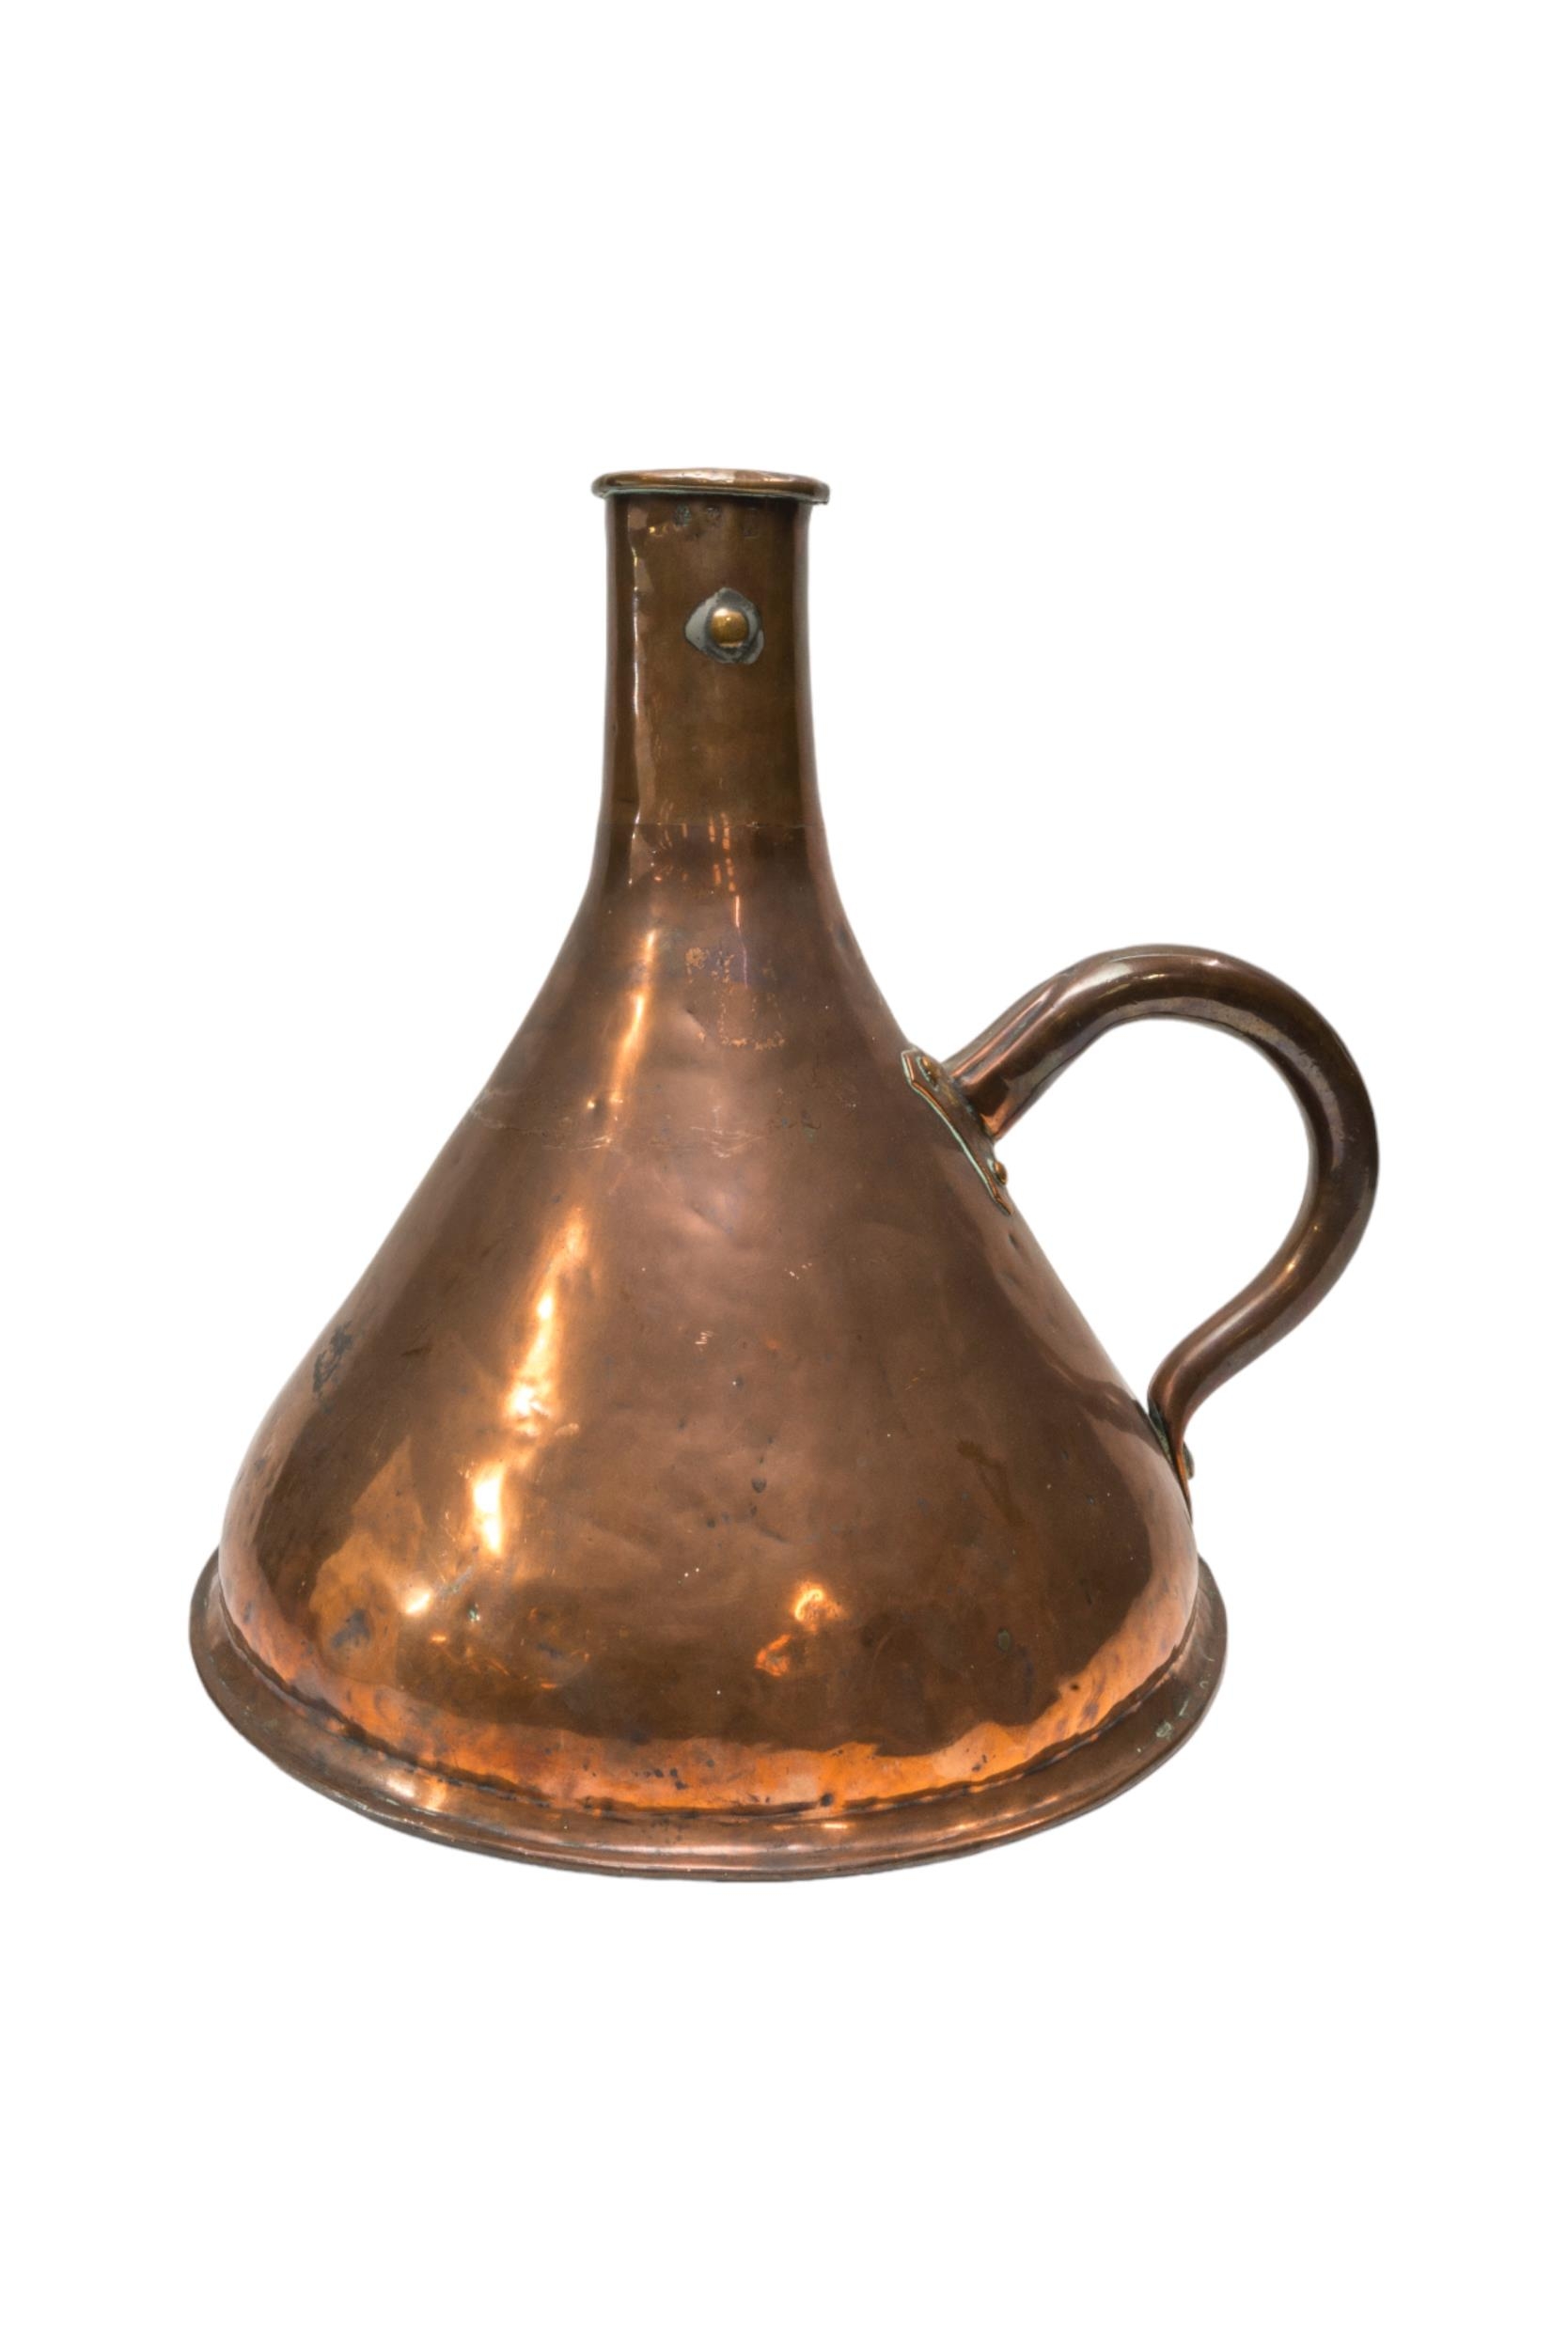 A LARGE COPPER MEASURE with narrow neck, loop handle and GR weights and measures stamp. 40 cms high. - Image 2 of 2